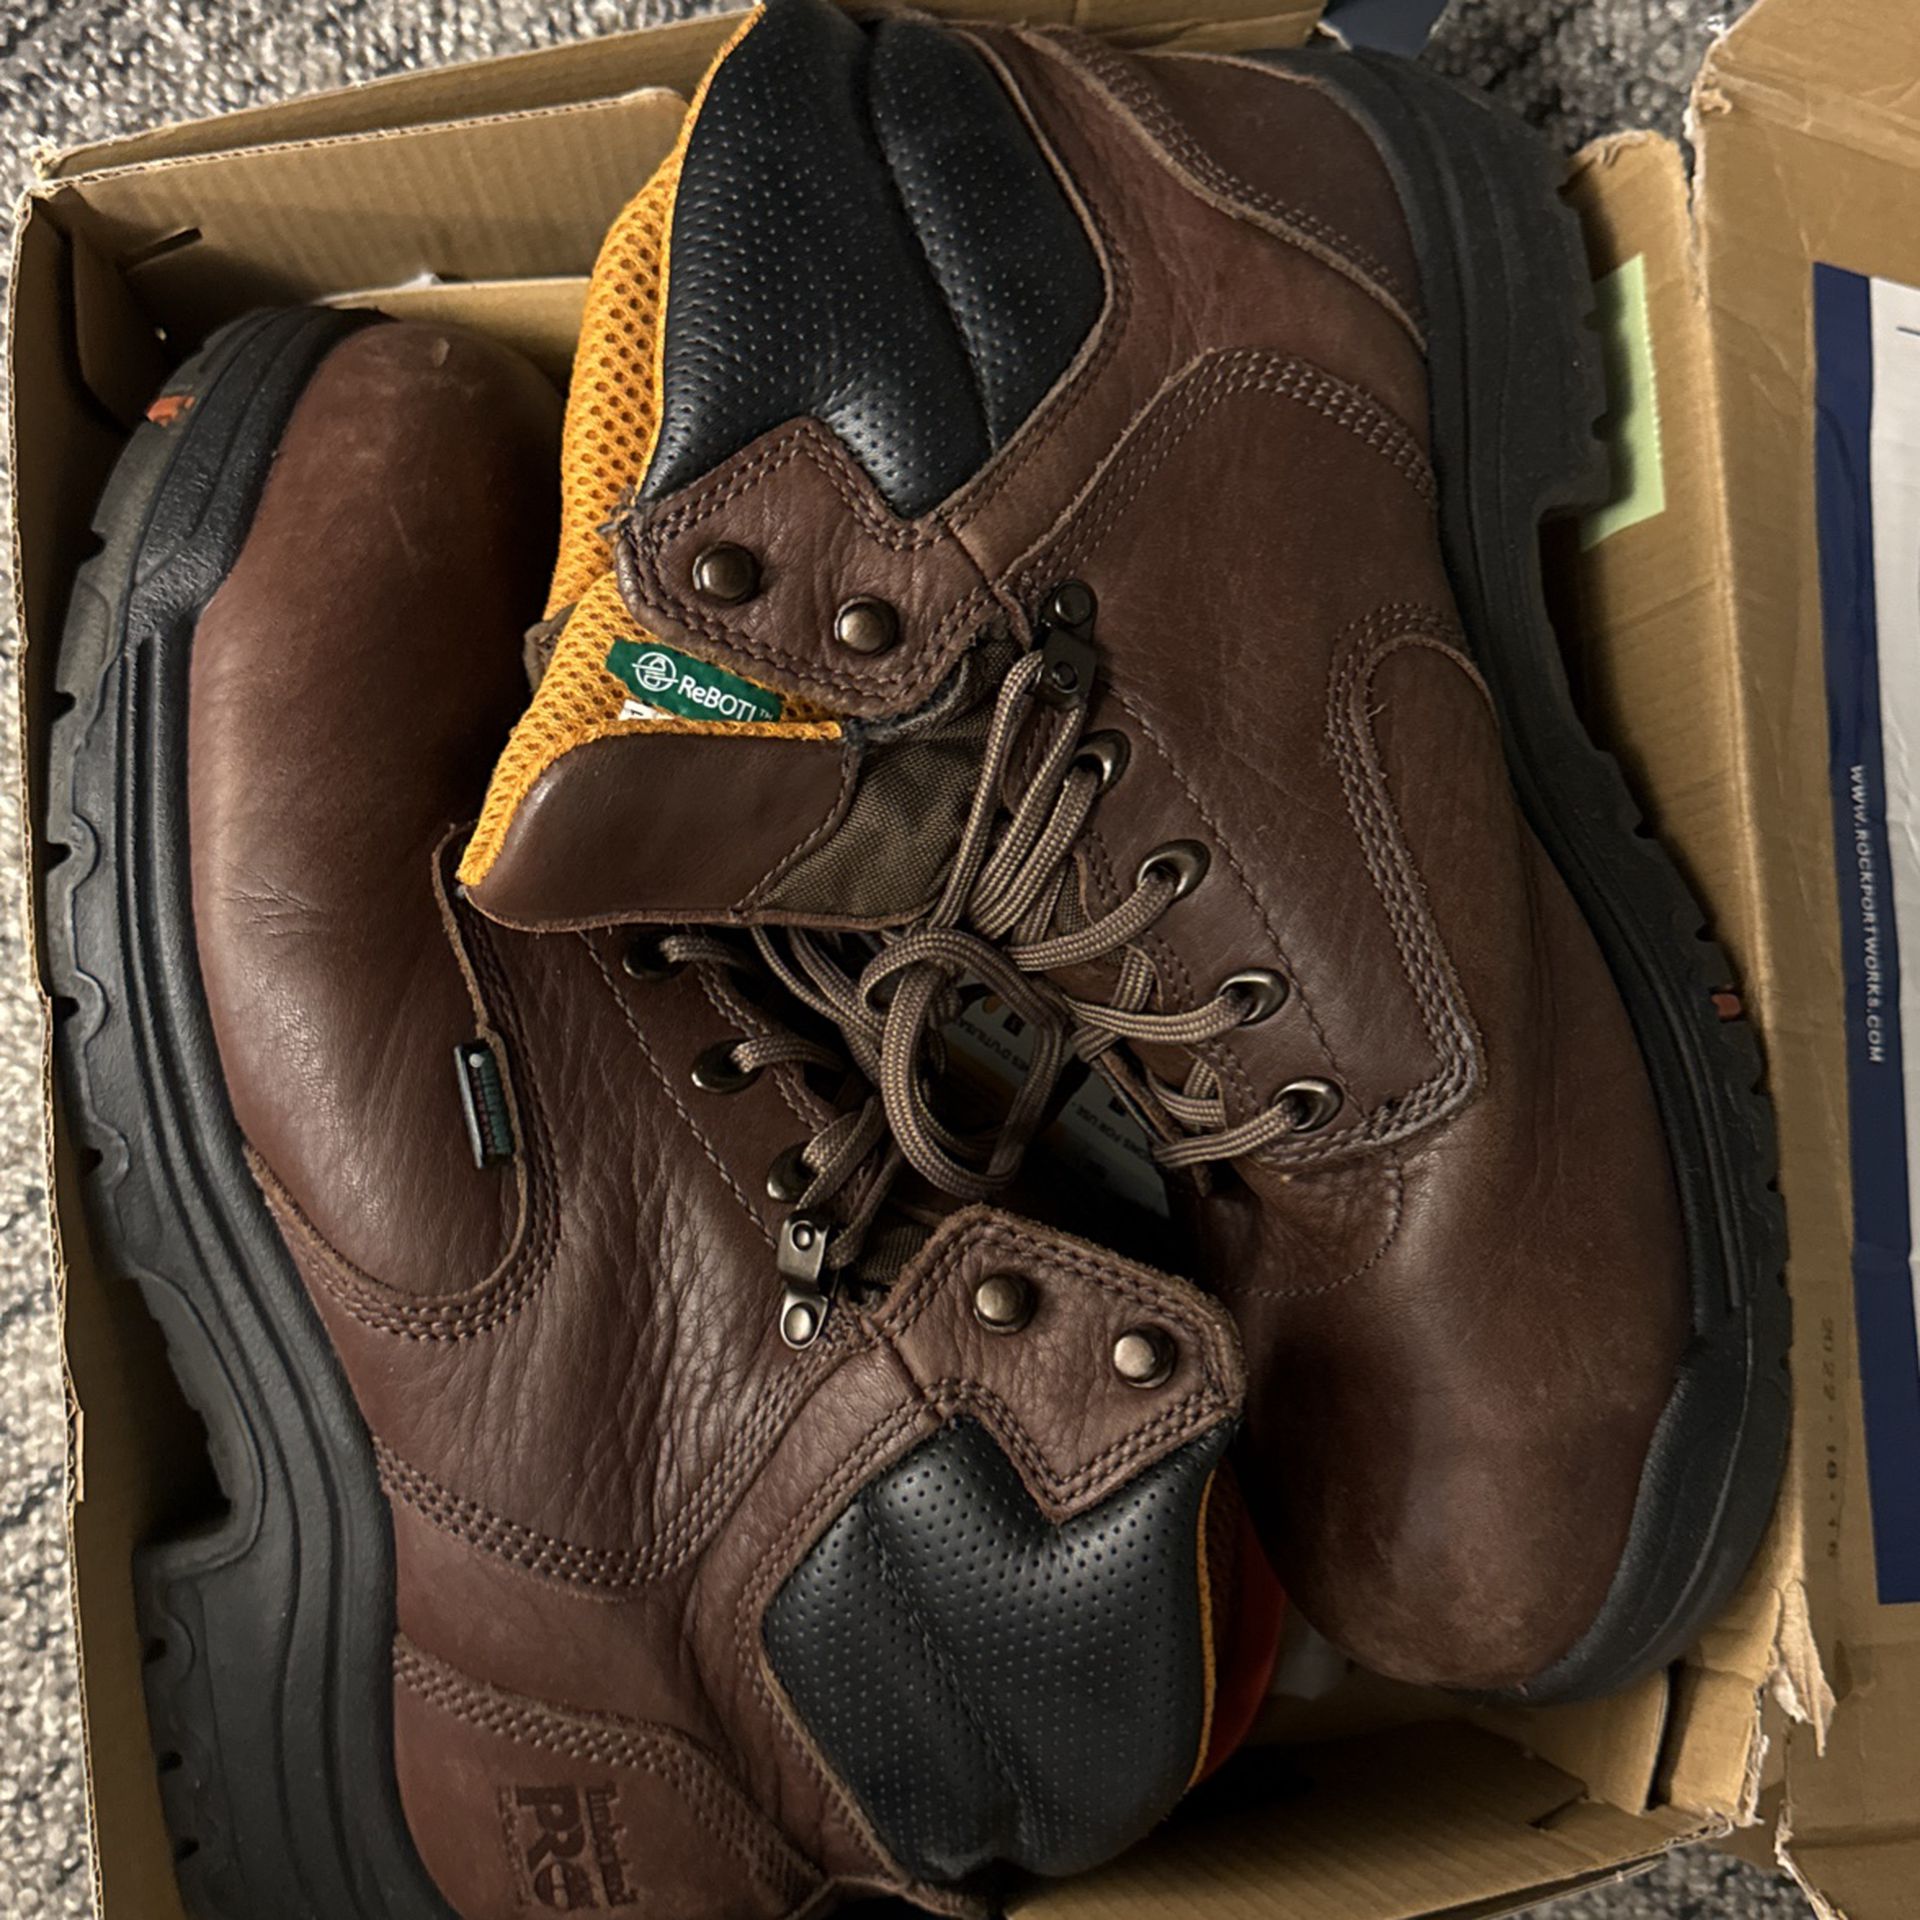 Timberland Pro Steel Toe Shoes Size 10.5